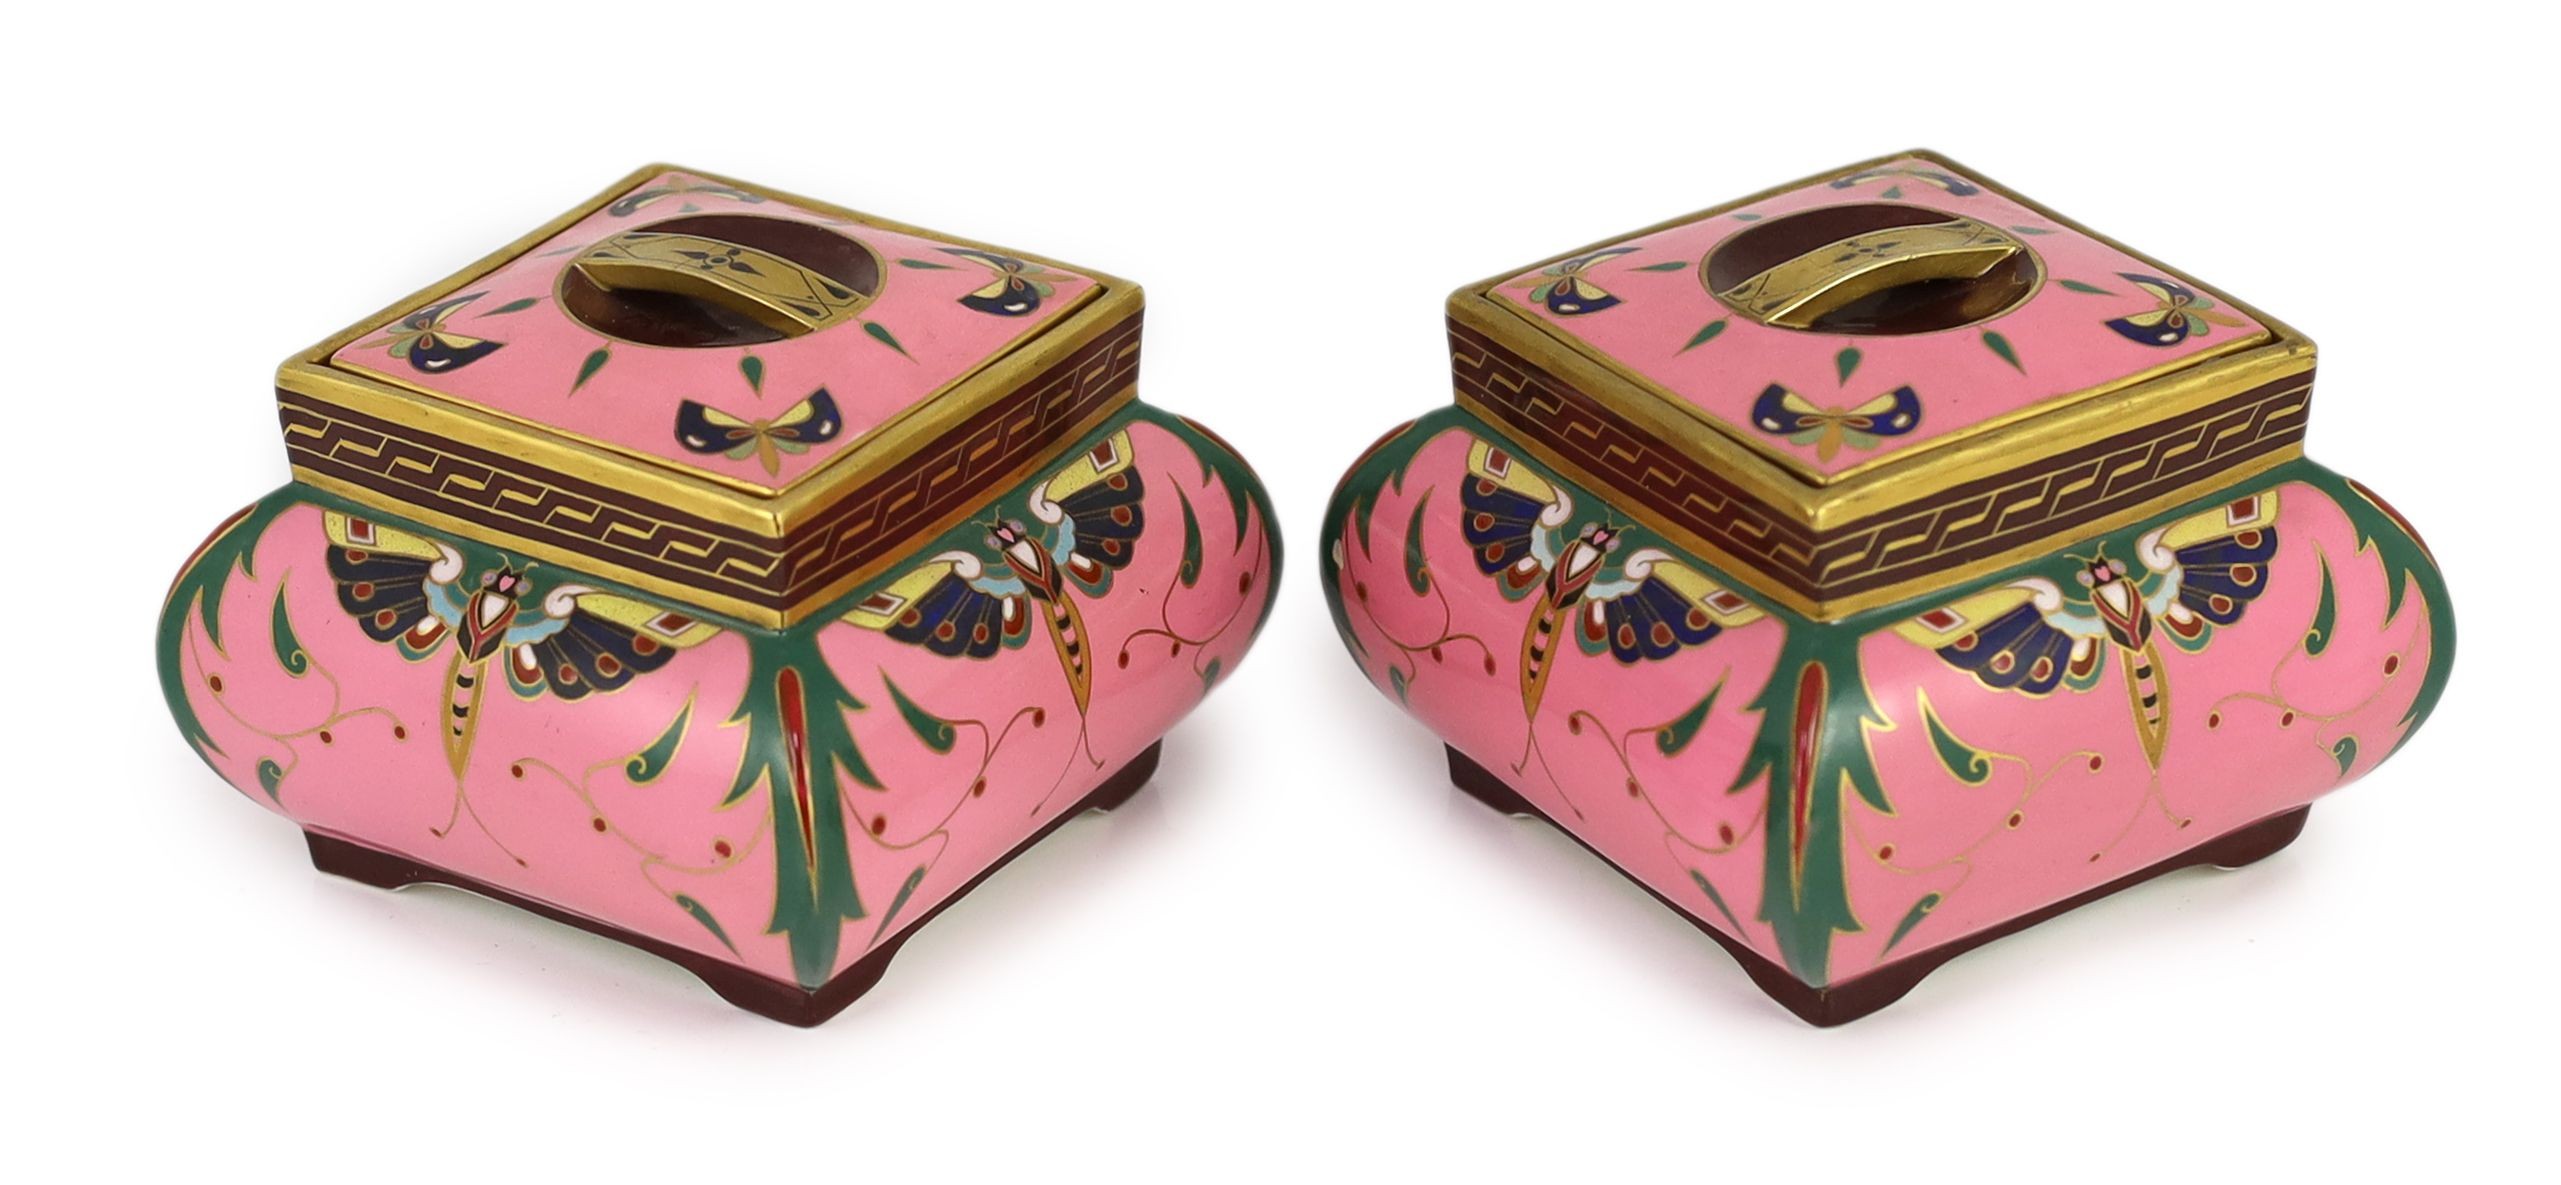 A pair of Minton pink ground square boxes and covers, c.1870, attributed to Christopher Dresser, 12cm wide